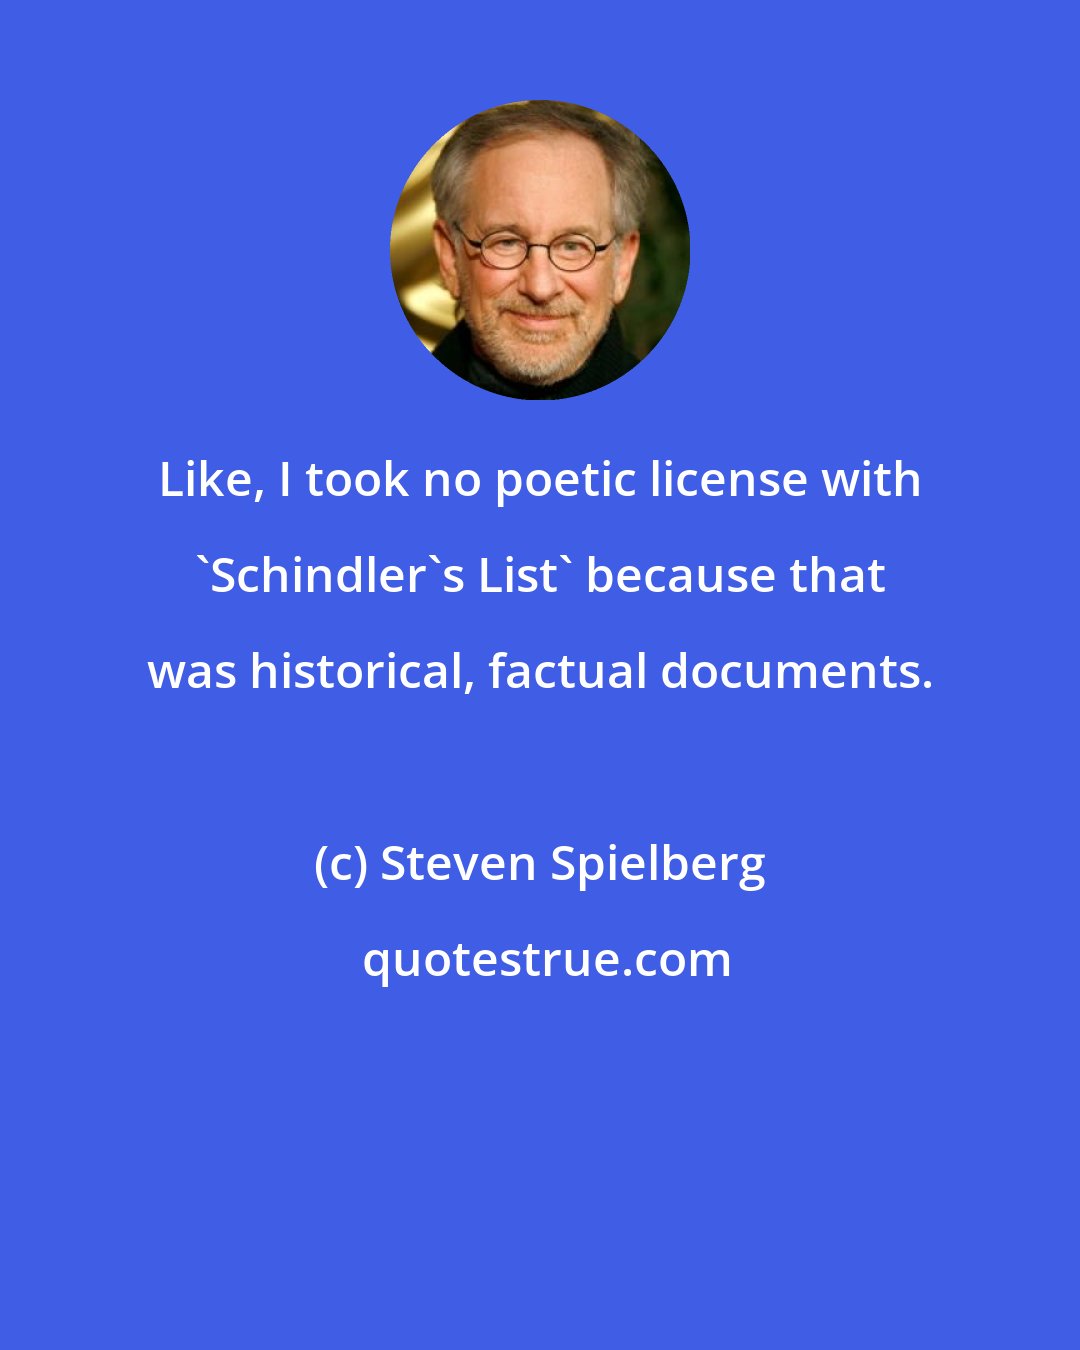 Steven Spielberg: Like, I took no poetic license with 'Schindler's List' because that was historical, factual documents.